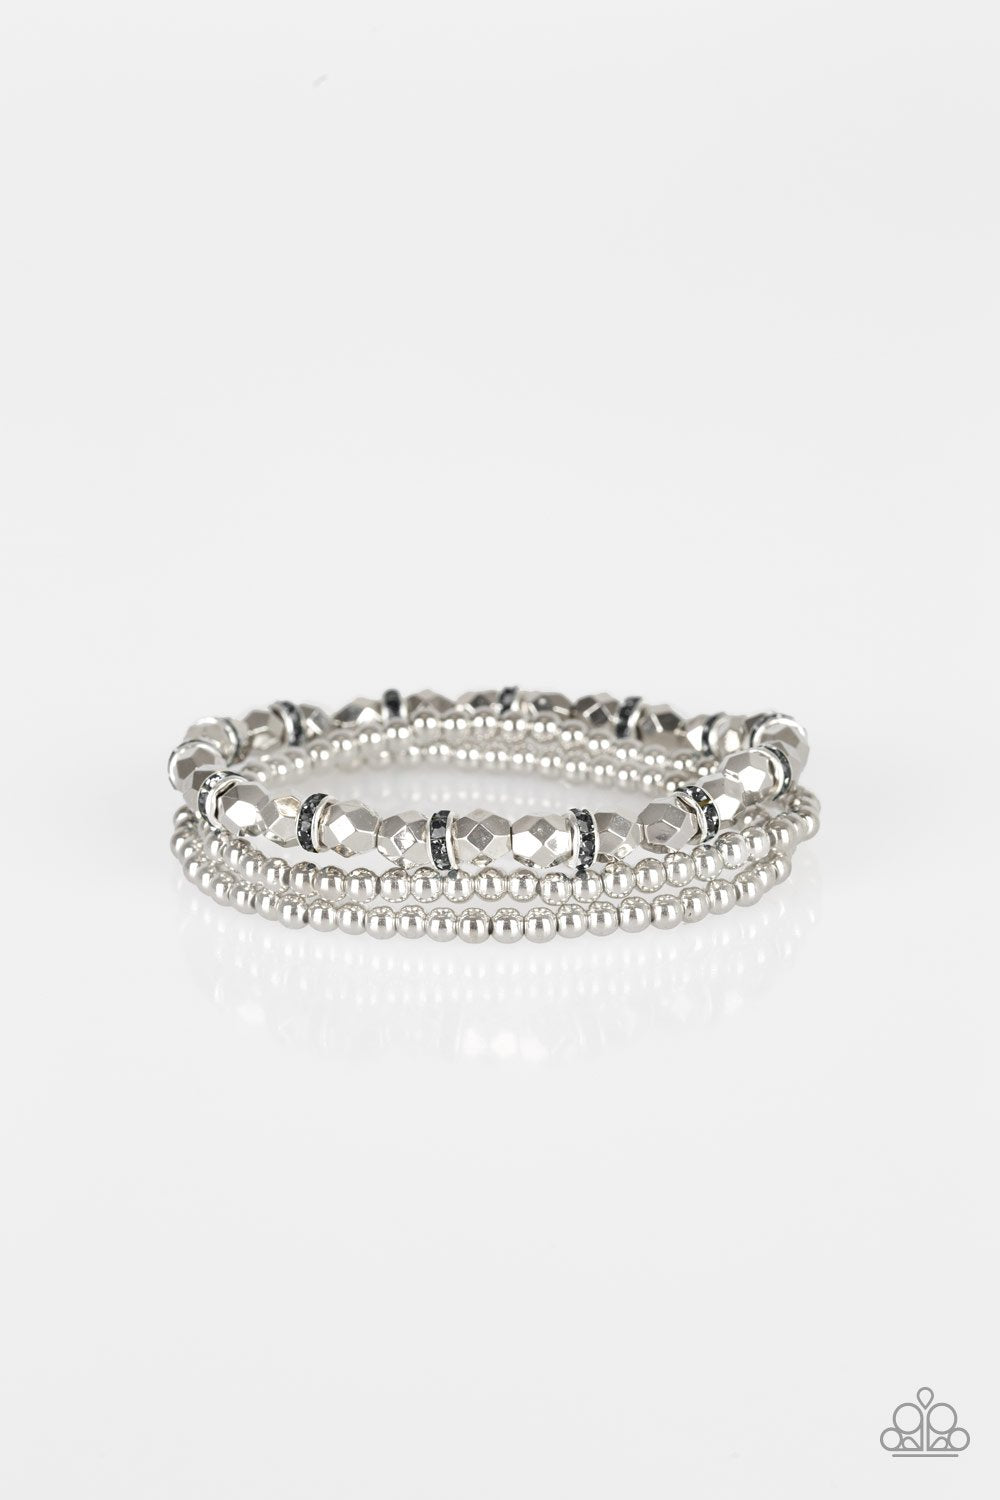 Let There Beam Light Silver Stretch Bracelet Set - Paparazzi Accessories-CarasShop.com - $5 Jewelry by Cara Jewels